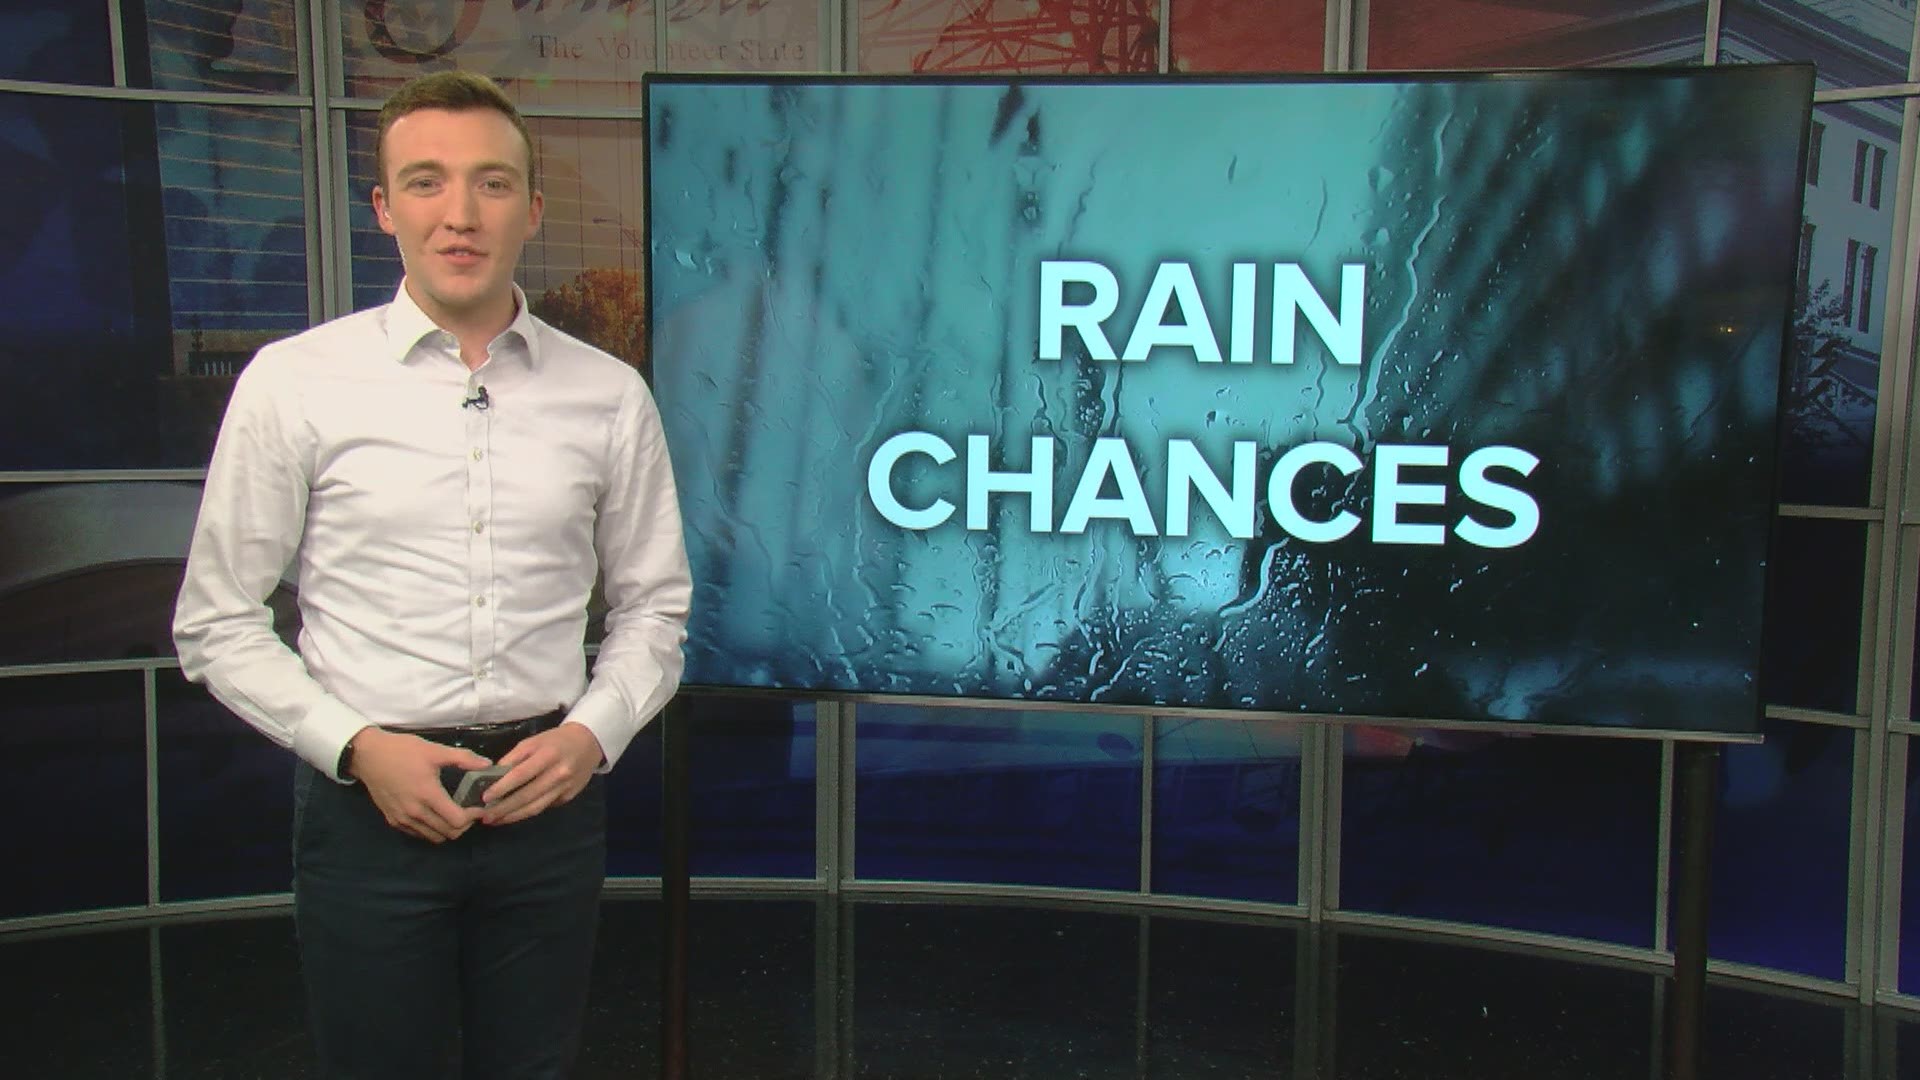 Rain chance forecasts can sometimes be confusing to understand.